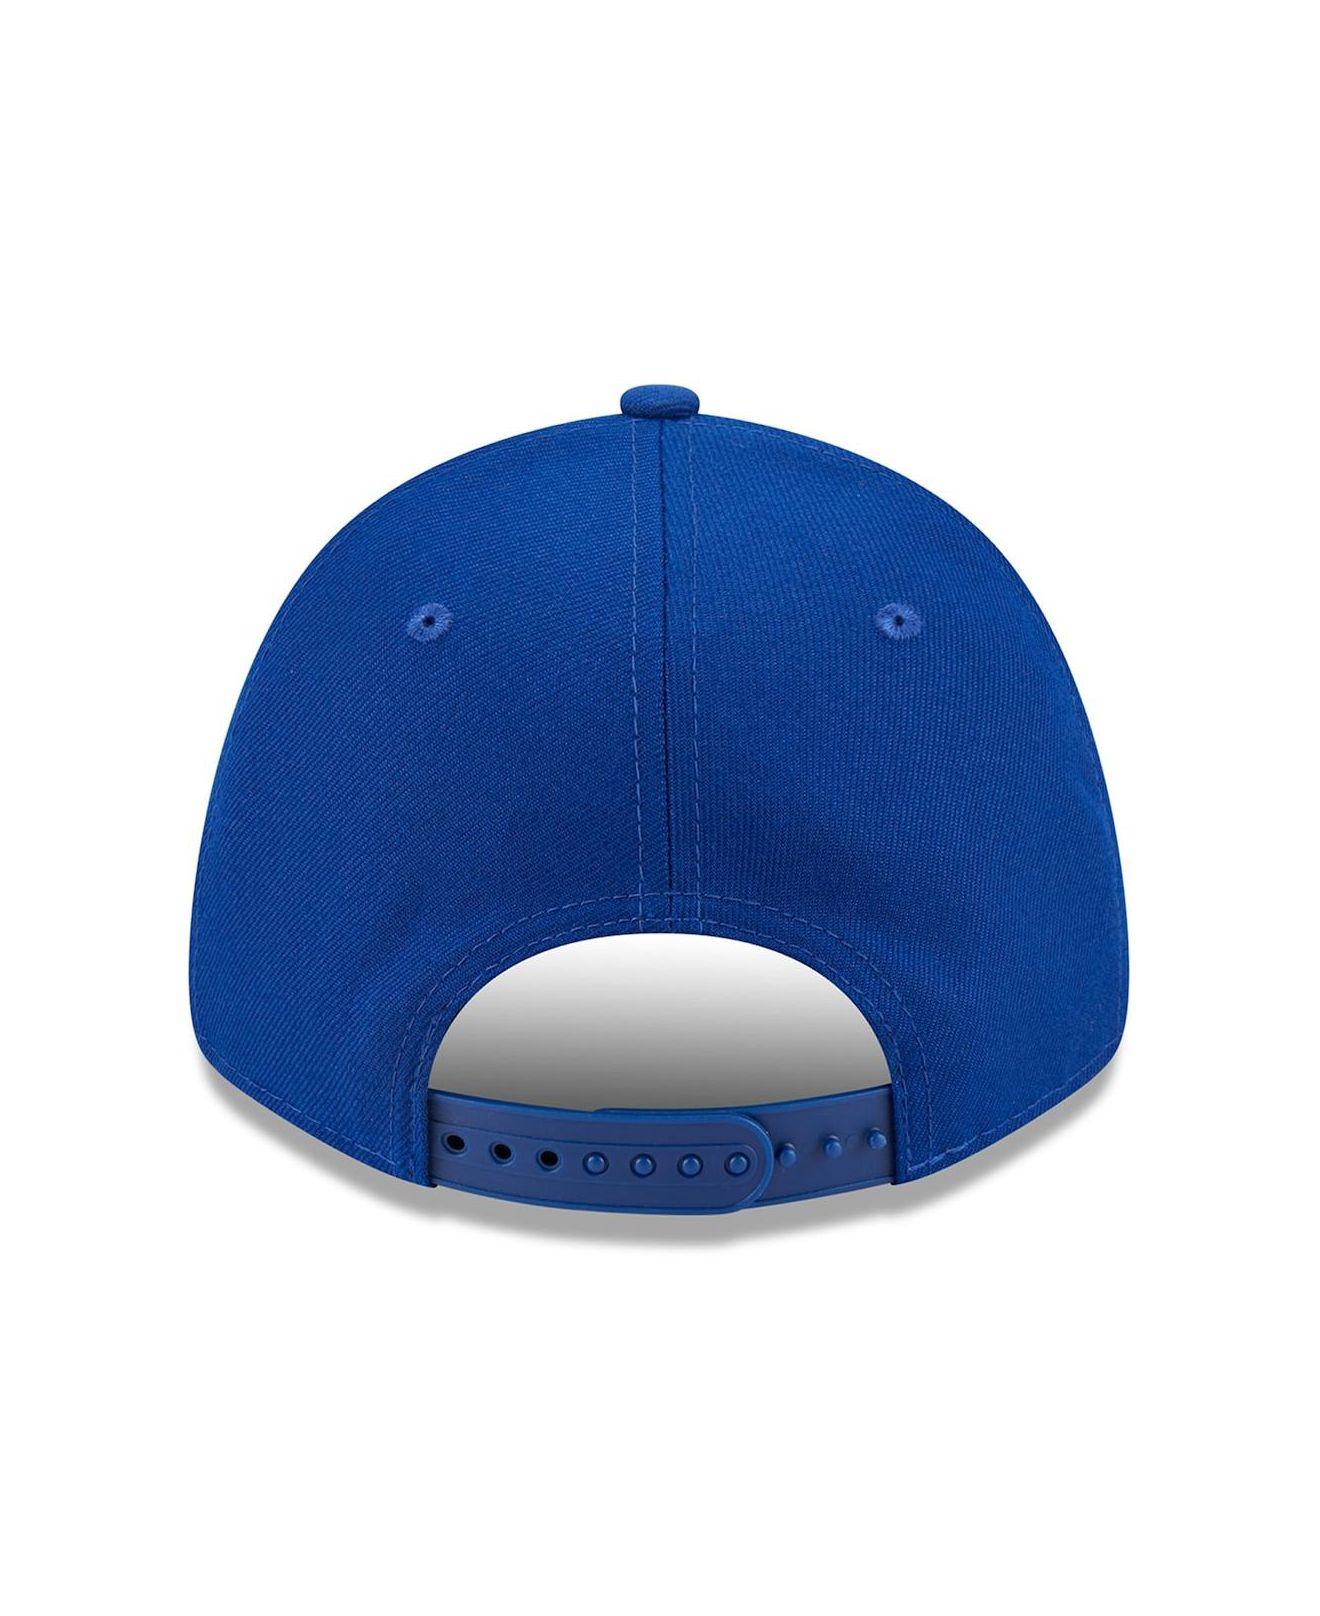 MLB Father's Day Fitted Hats 2021